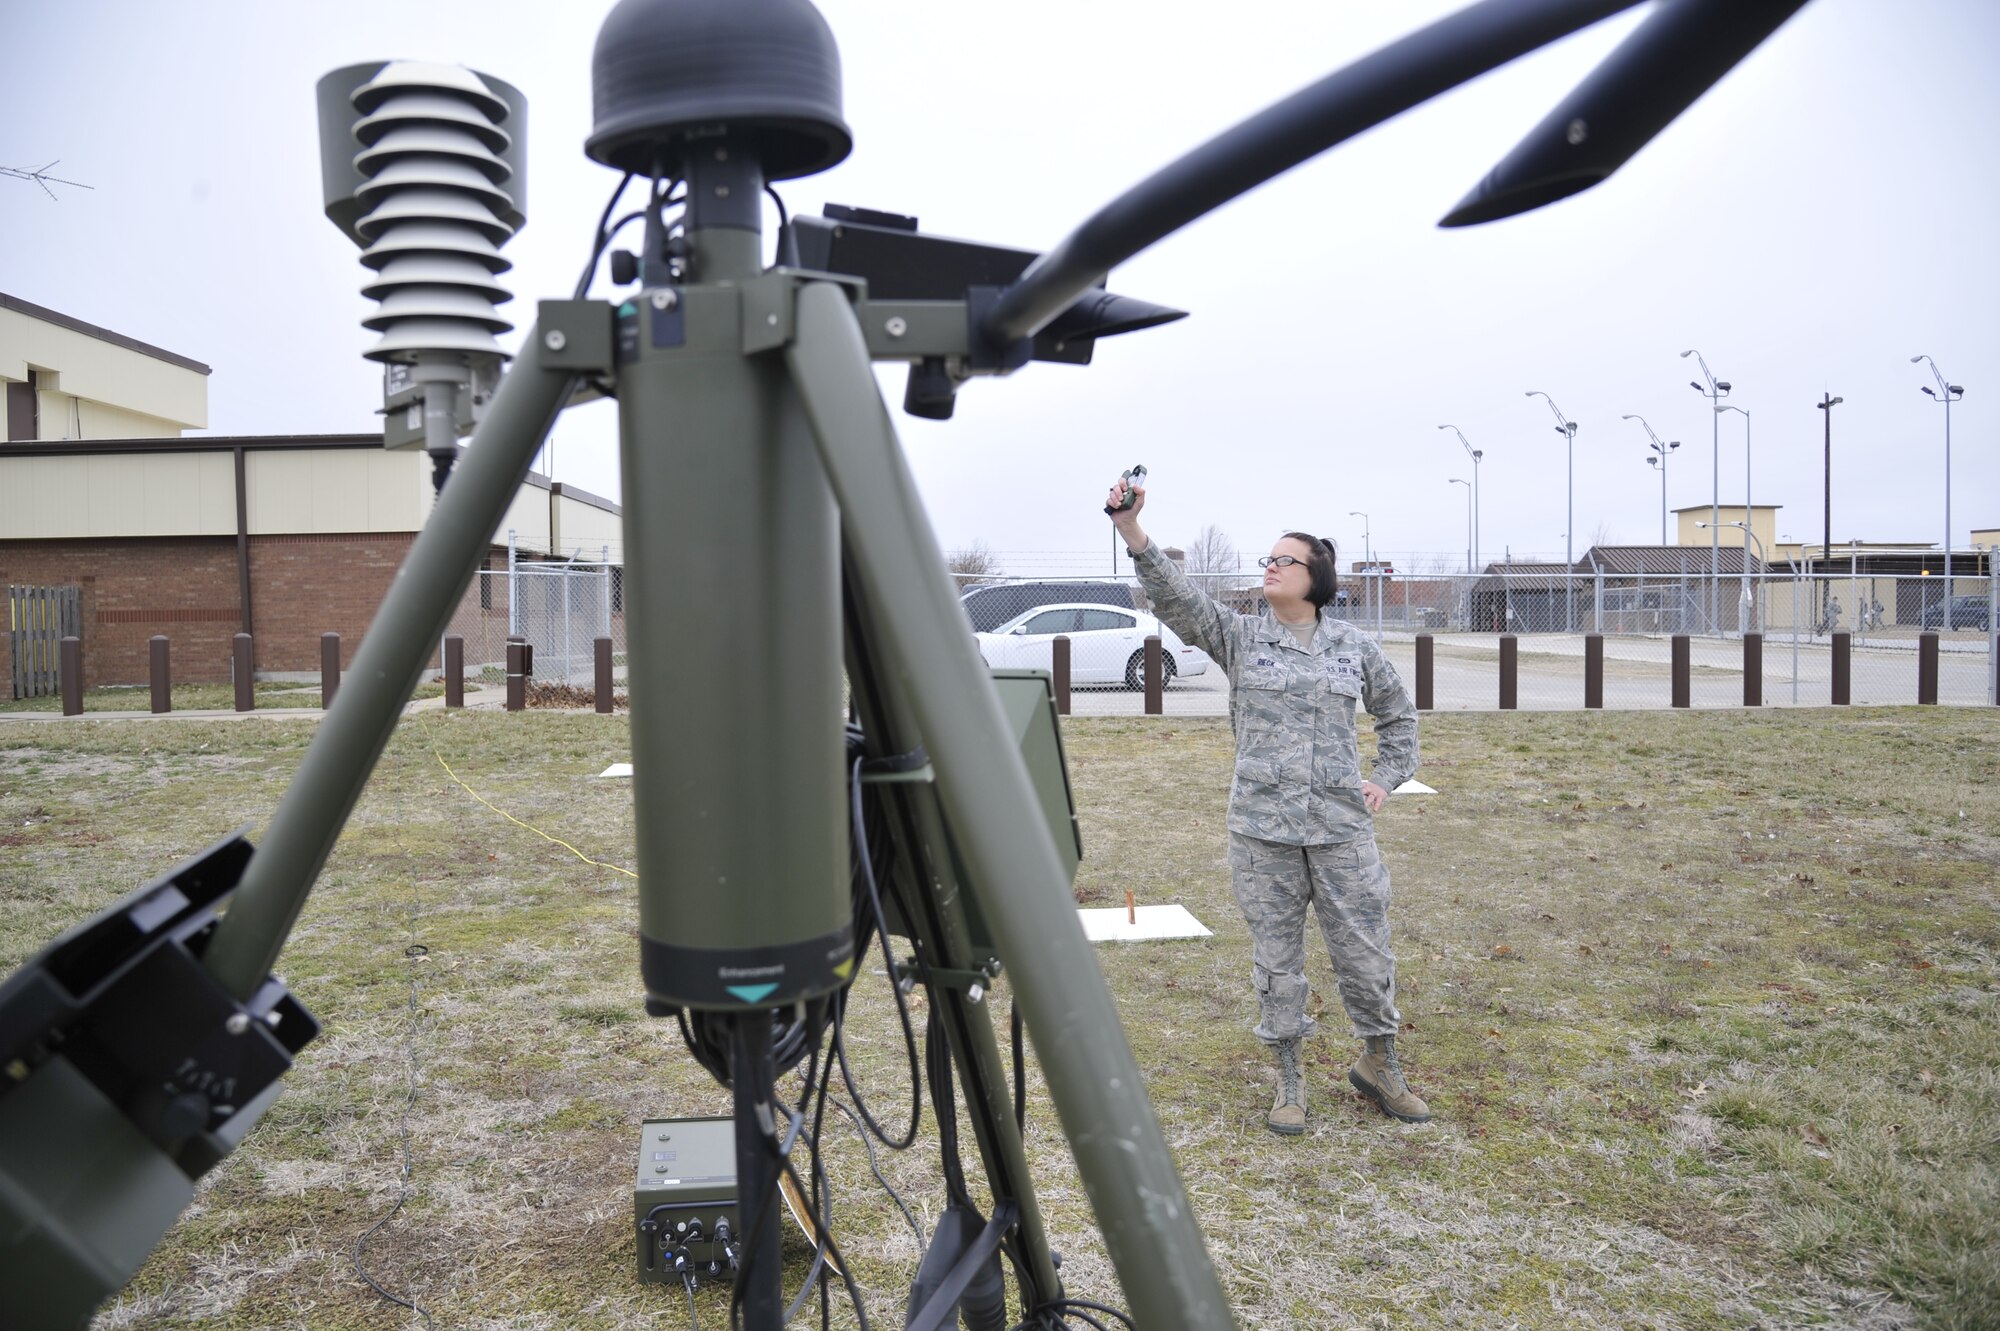 U.S. Air Force Senior Airman Heather Rieck, 509th Operation Support Squadron weather journeyman, holds up a kertrel sensor, Whiteman Air Force Base, Mo., March 20, 2013. The kertrel sensor, like the TMQ-53, measures wind speed, temperature, wind direction and pressure. (U.S. Air Force photo by Airman 1st Class Keenan Berry/Released)  
